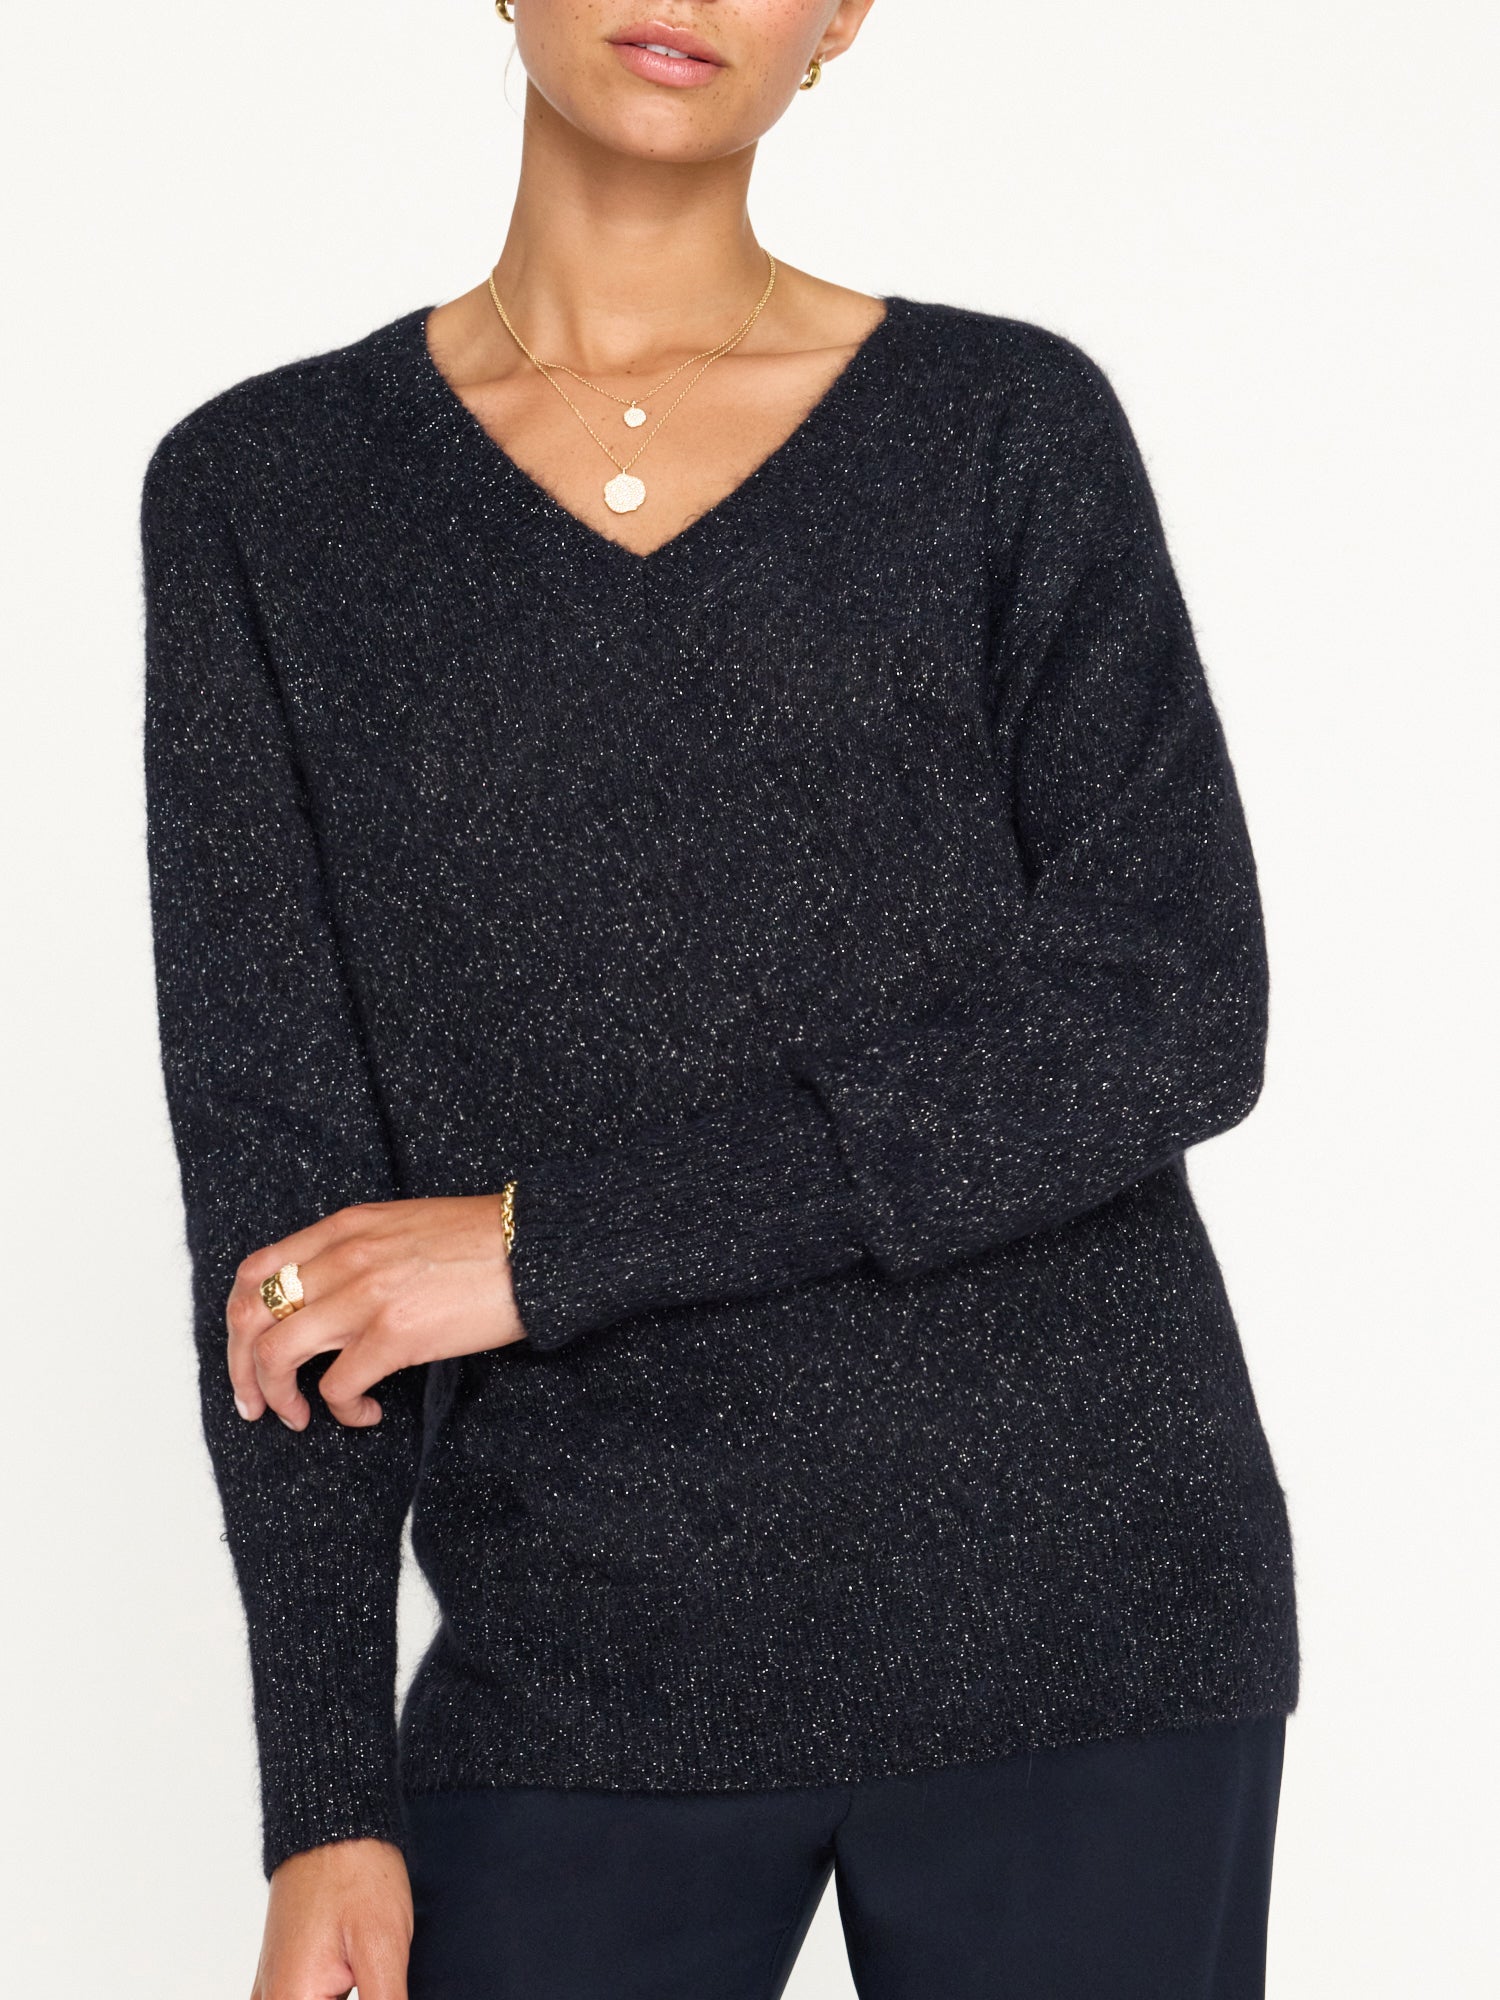 The Allery V-Neck Sweater